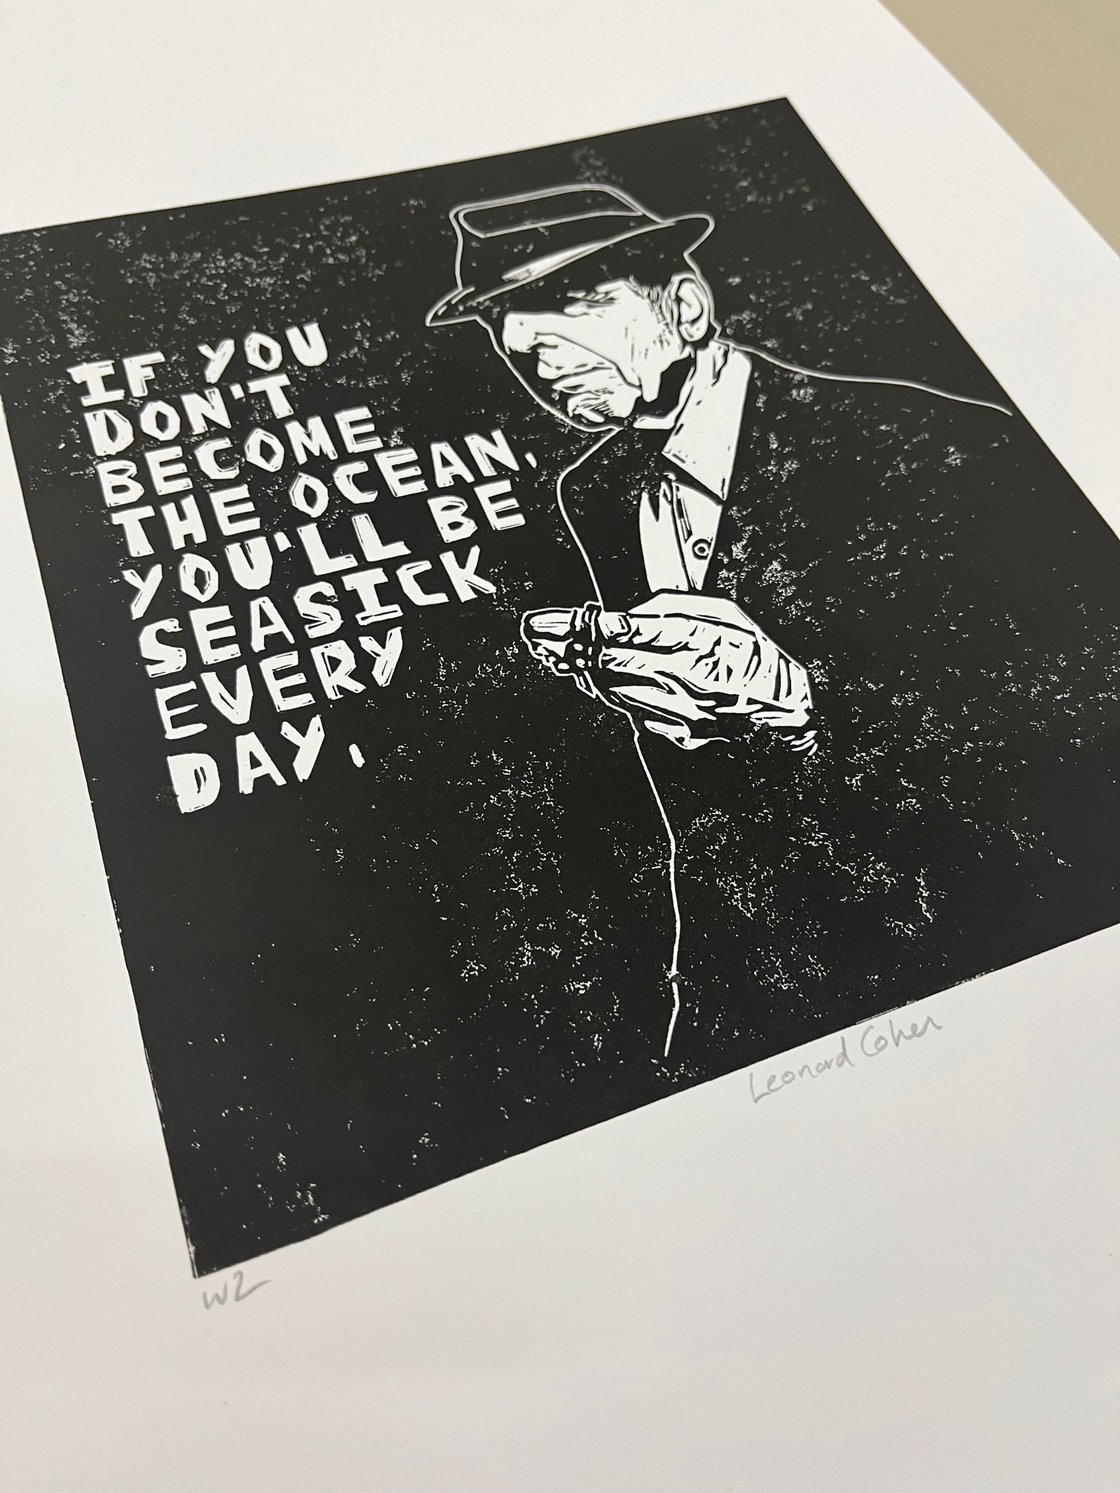 Image of Leonard Cohen. Hand Made. Original A4 linocut print. Limited and Signed. Art.